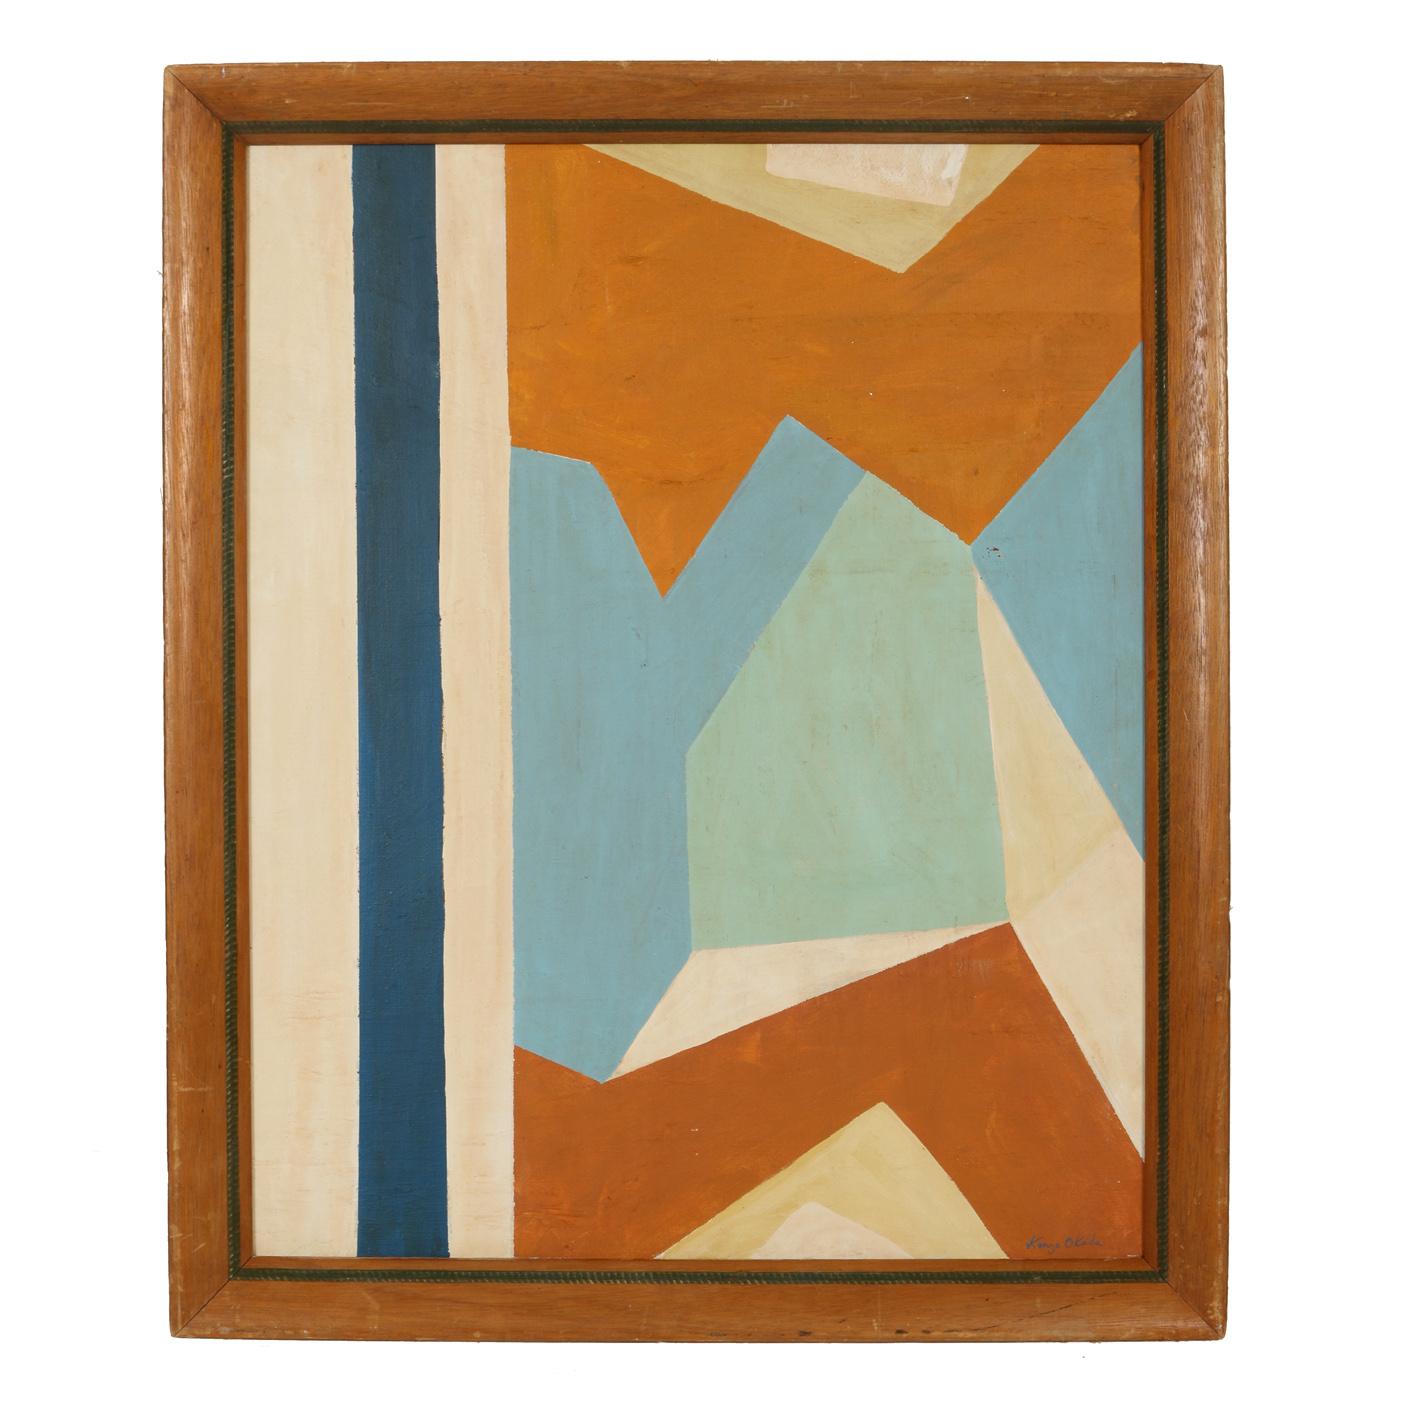 Large abstract painting by Kenzo Okada in oil on board in blue, ochre and cream.